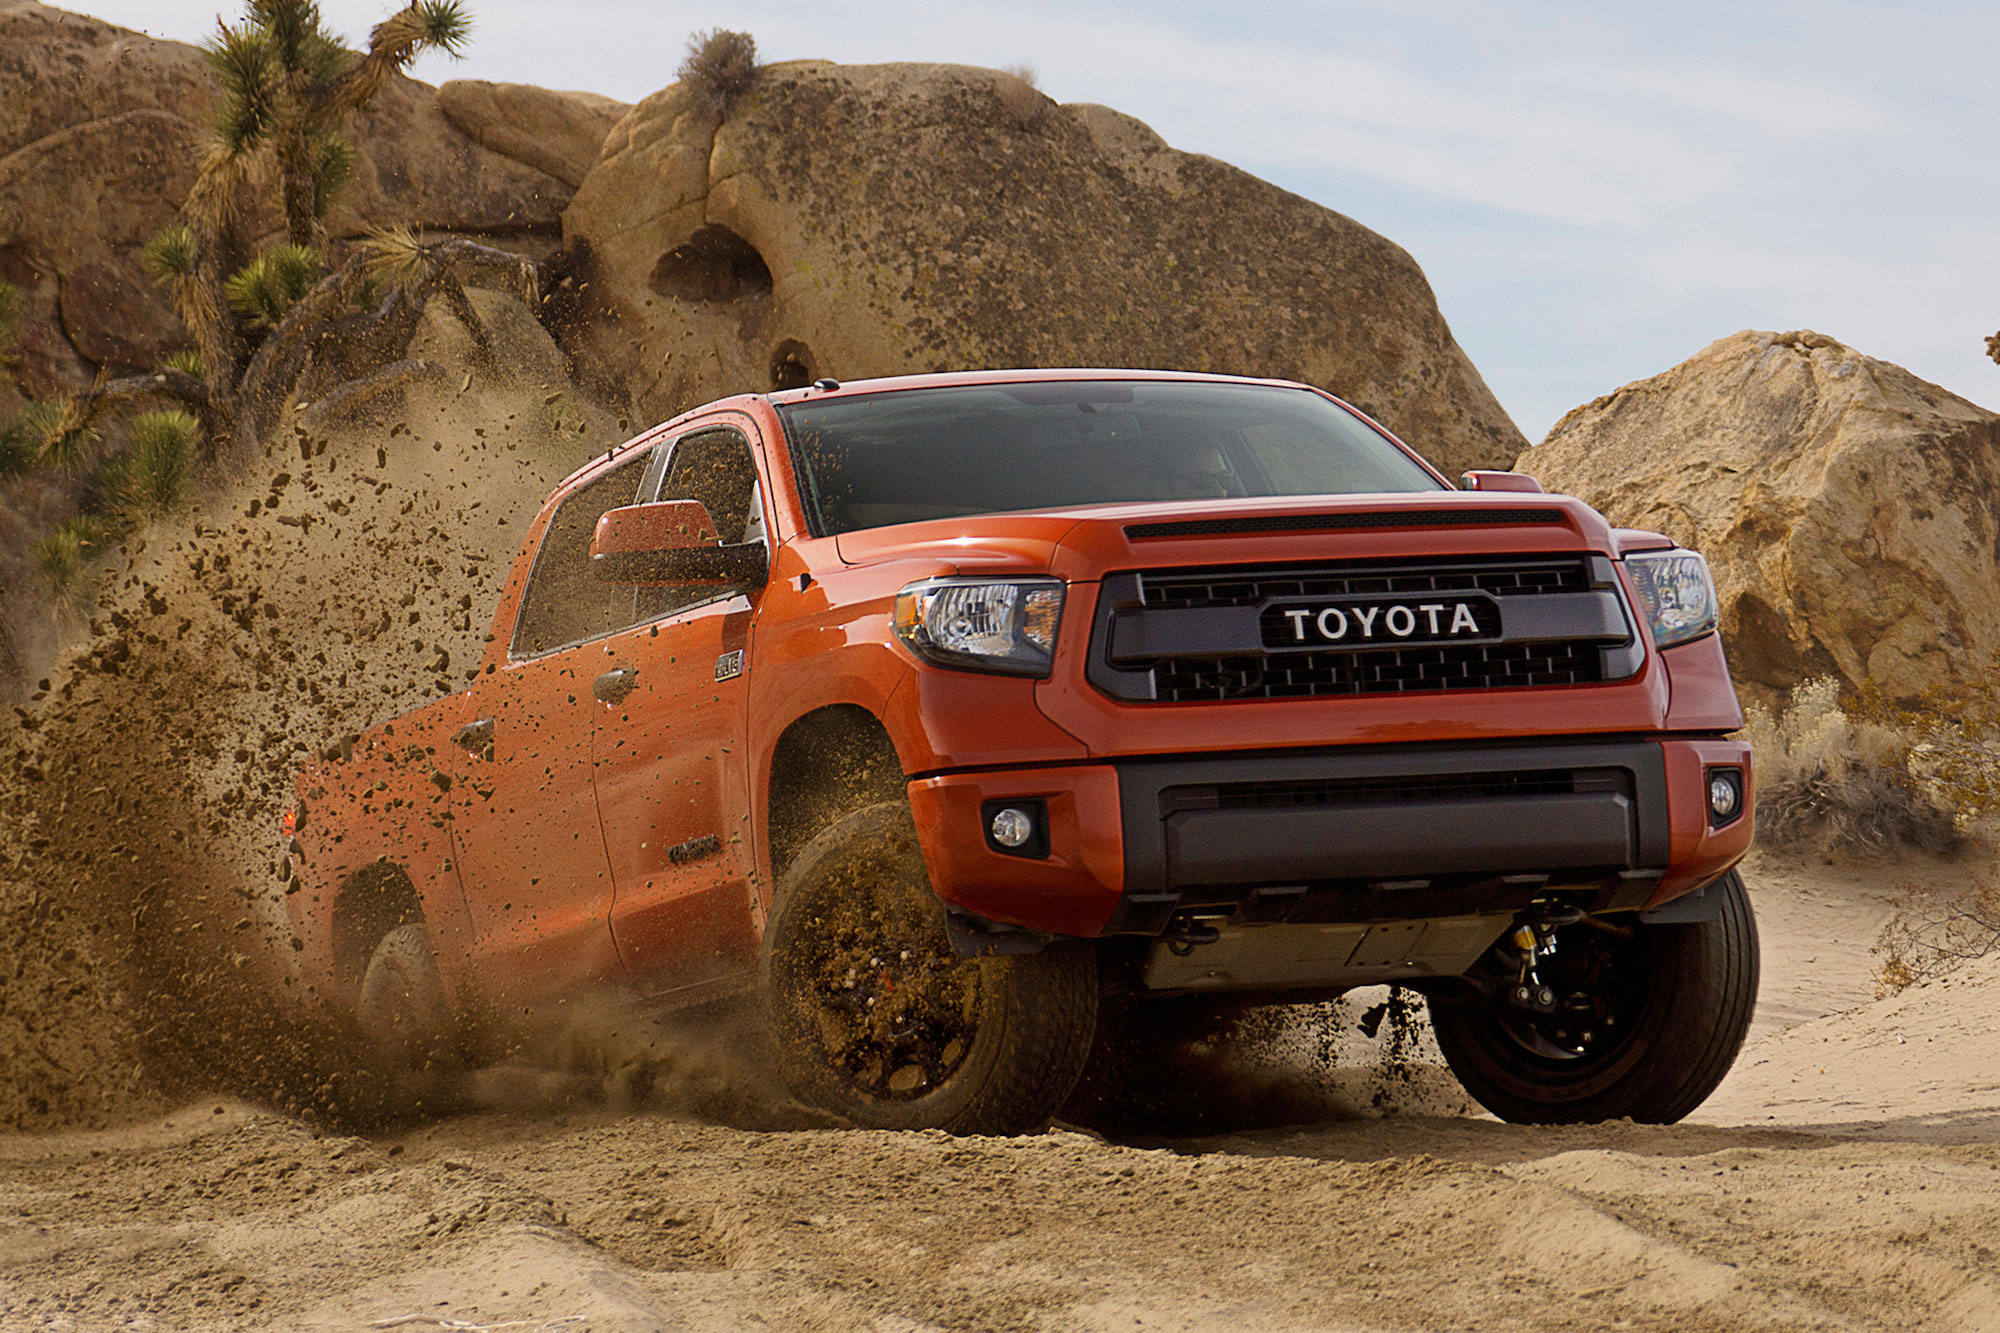 Toyota Tundra, HD wallpapers, 2015 model, High-quality images, 2000x1340 HD Desktop